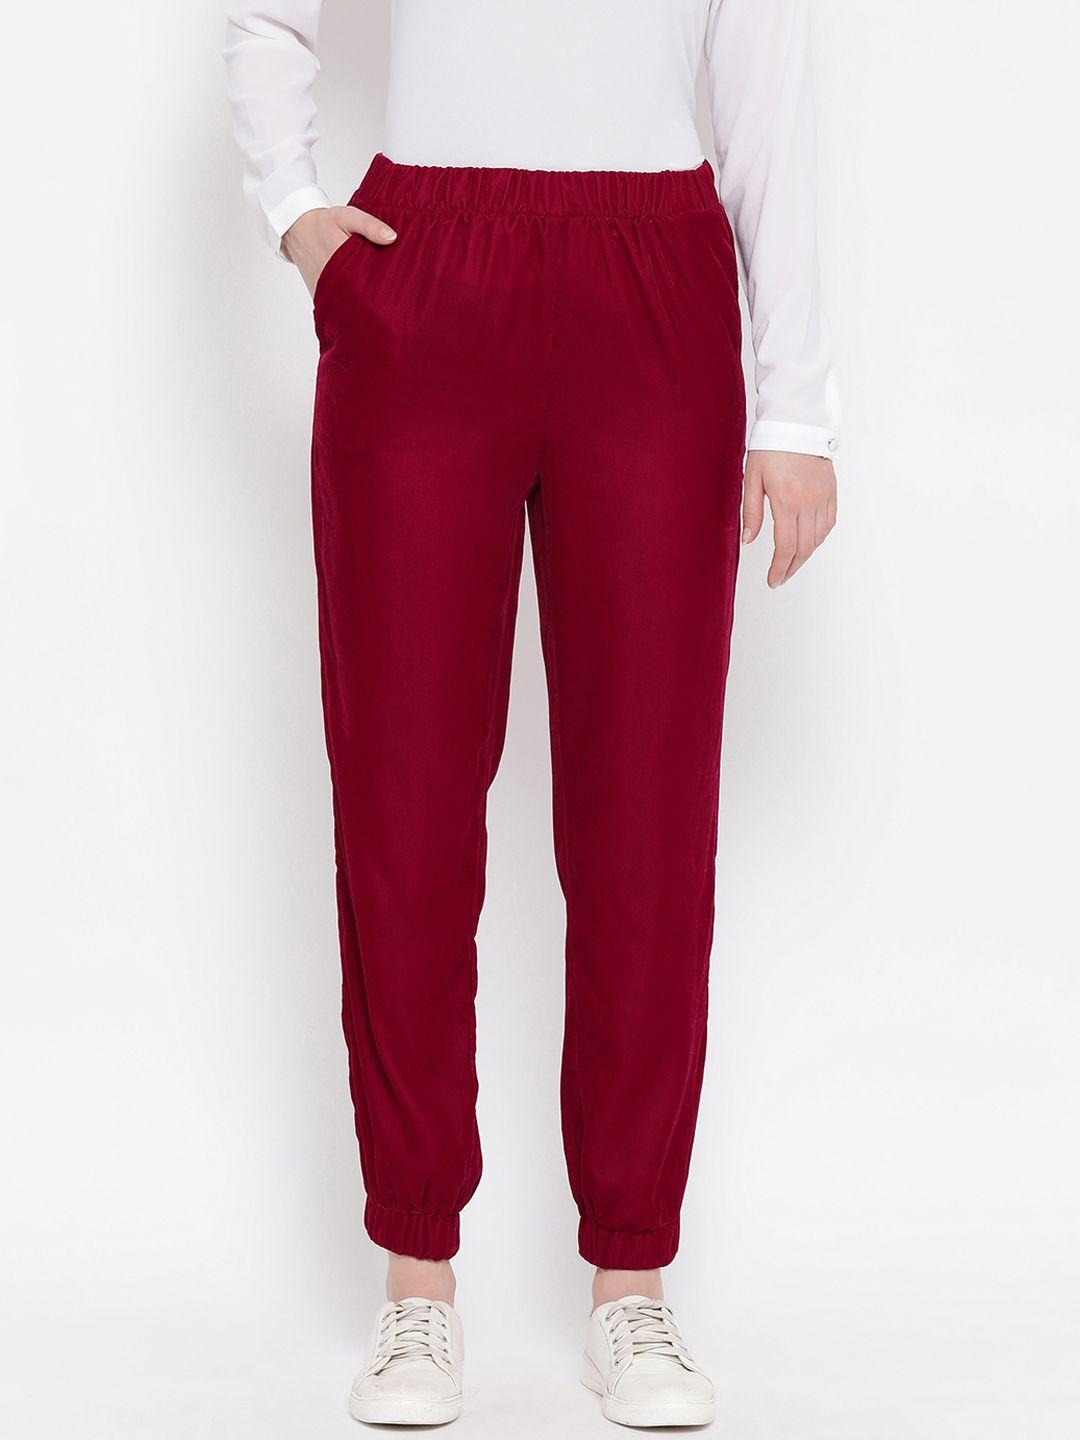 oxolloxo-women-maroon-regular-fit-solid-joggers